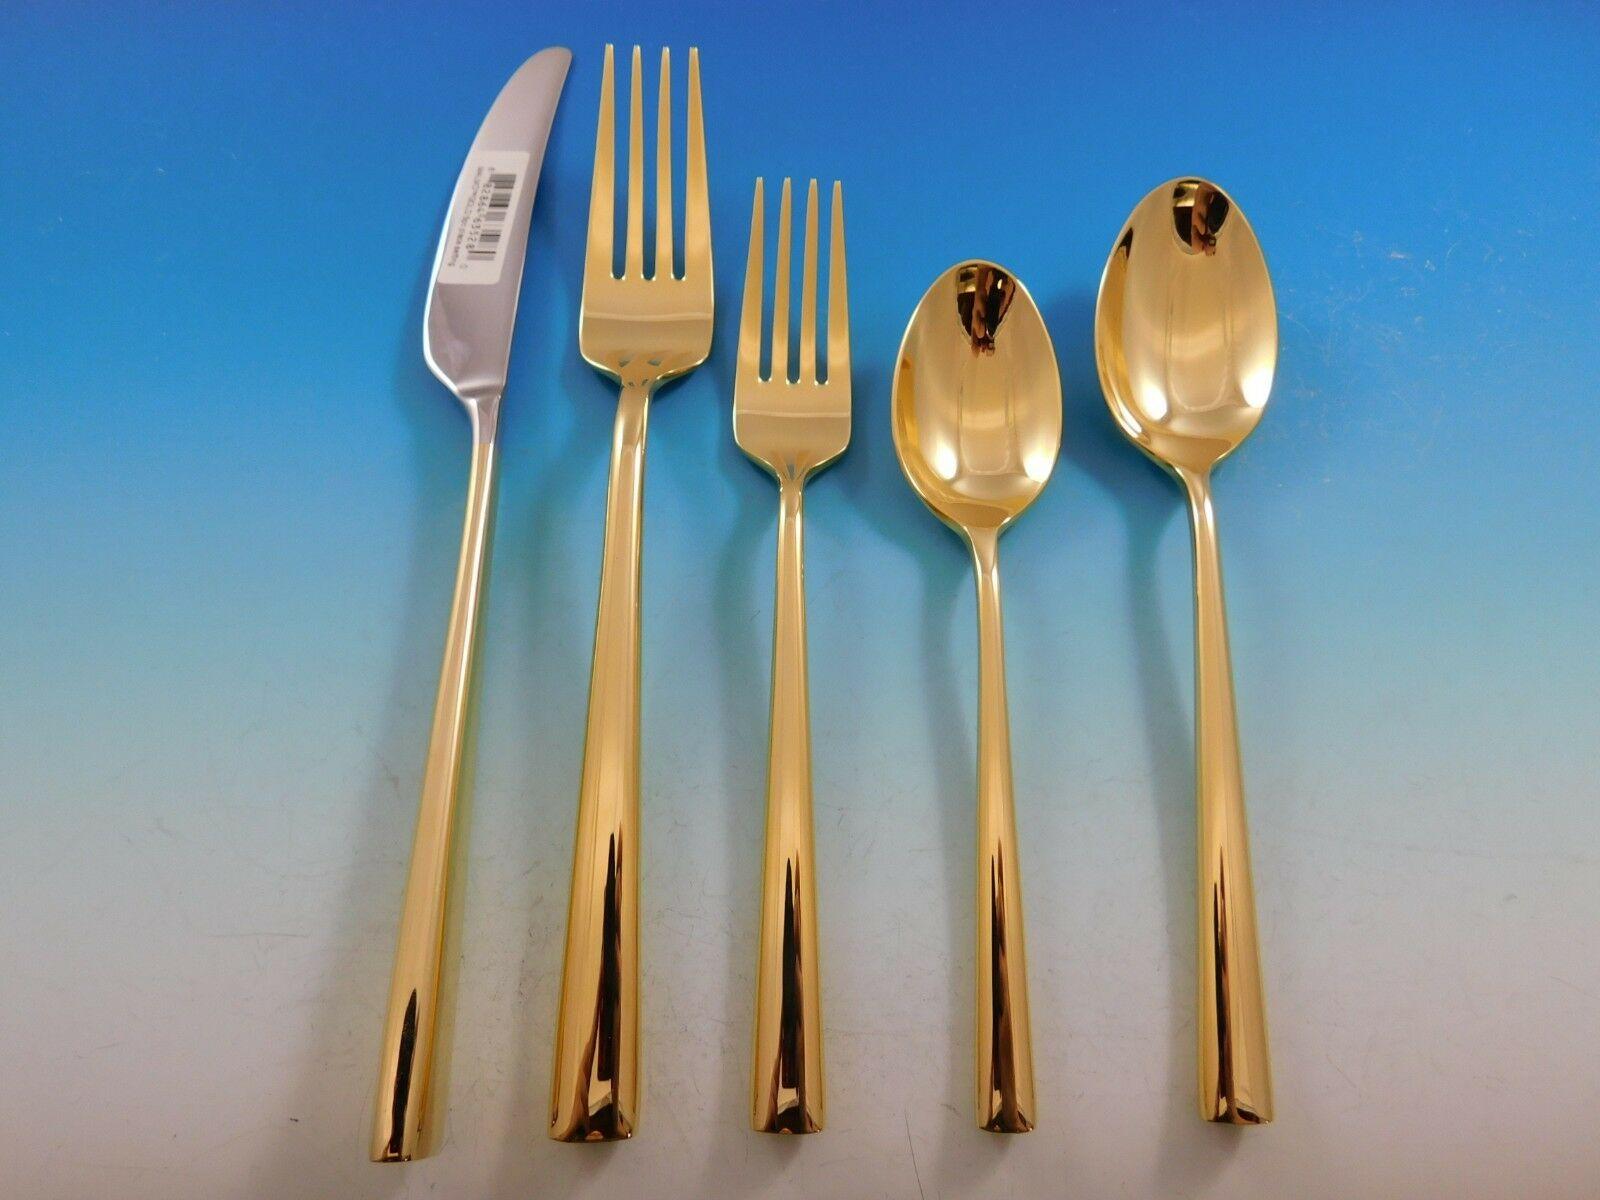 Featuring precision lines and unique, tubular handles, the kate spade New York Malmo Gold flatware set reinvigorates modern dining. The golden color in 18/10 stainless steel evokes a richness that makes this flatware an elegant addition to any